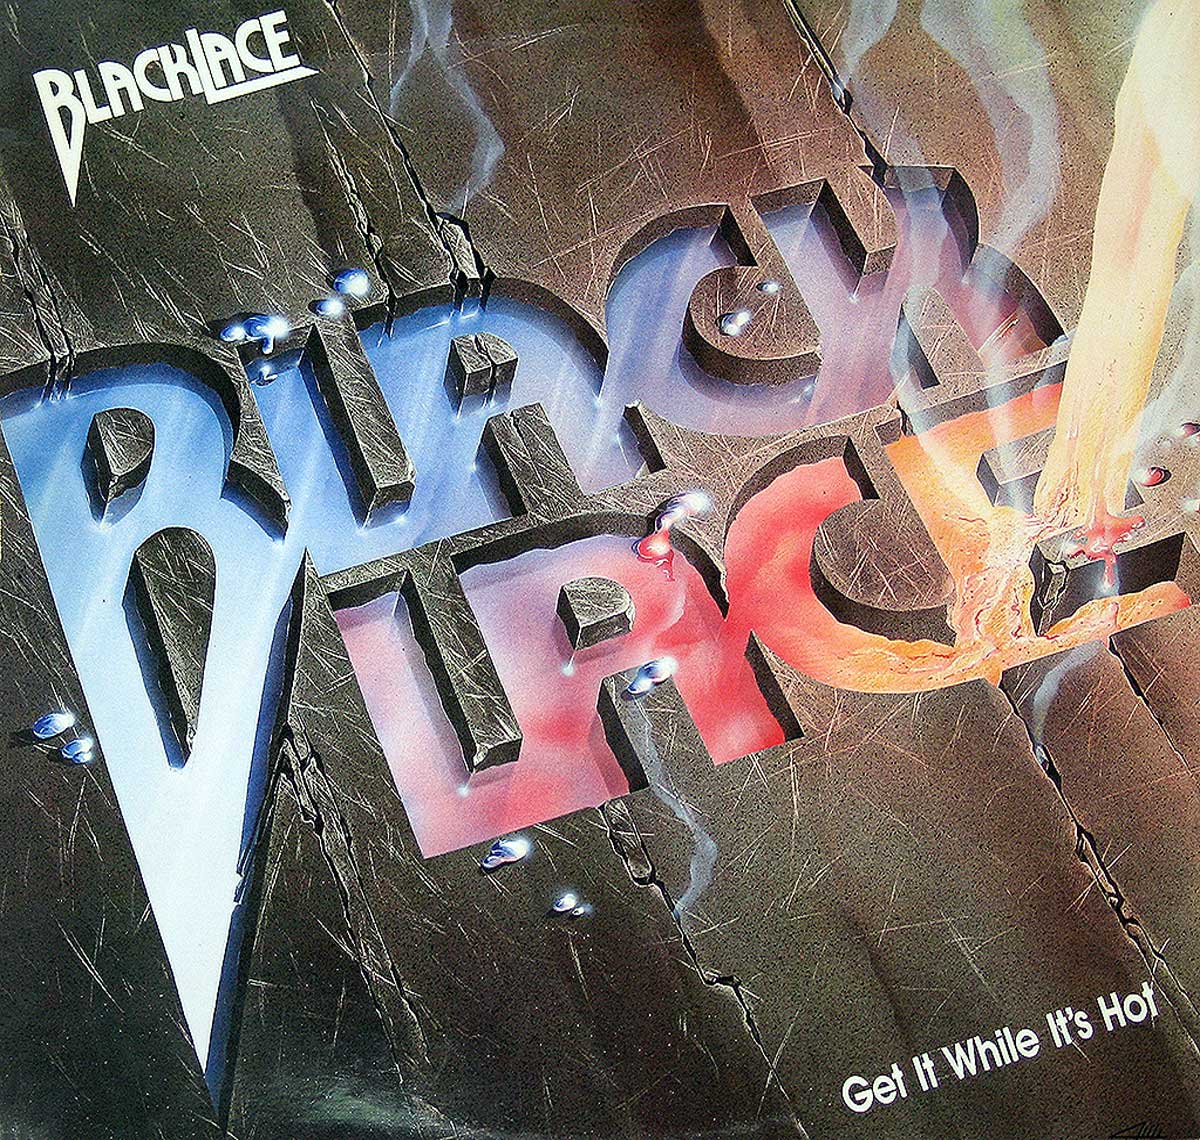 large album front cover photo of: BLACKLACE GET IT WHILE IT'S HOT  